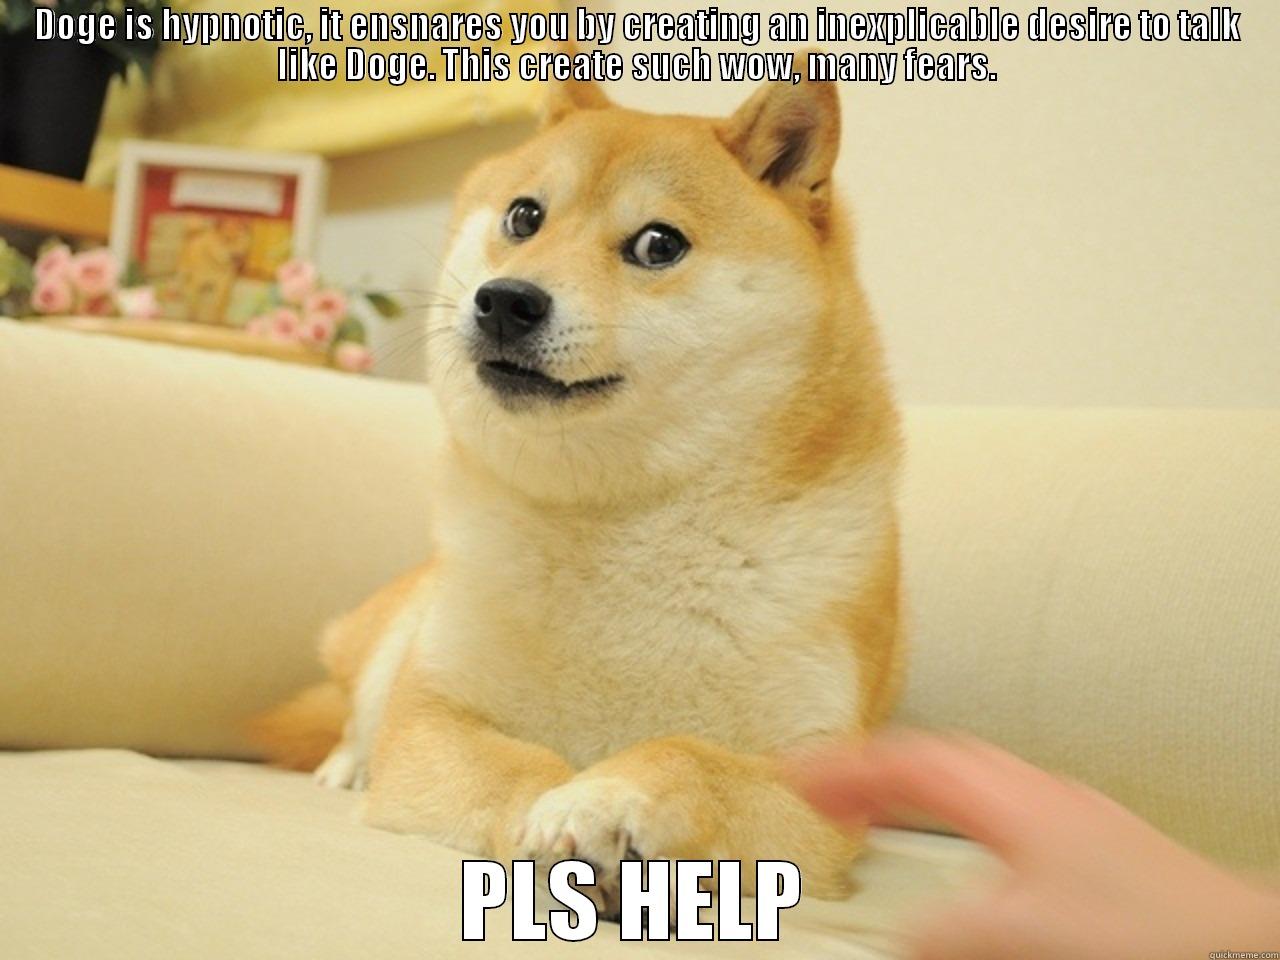 DOGE IS HYPNOTIC, IT ENSNARES YOU BY CREATING AN INEXPLICABLE DESIRE TO TALK LIKE DOGE. THIS CREATE SUCH WOW, MANY FEARS. PLS HELP Misc